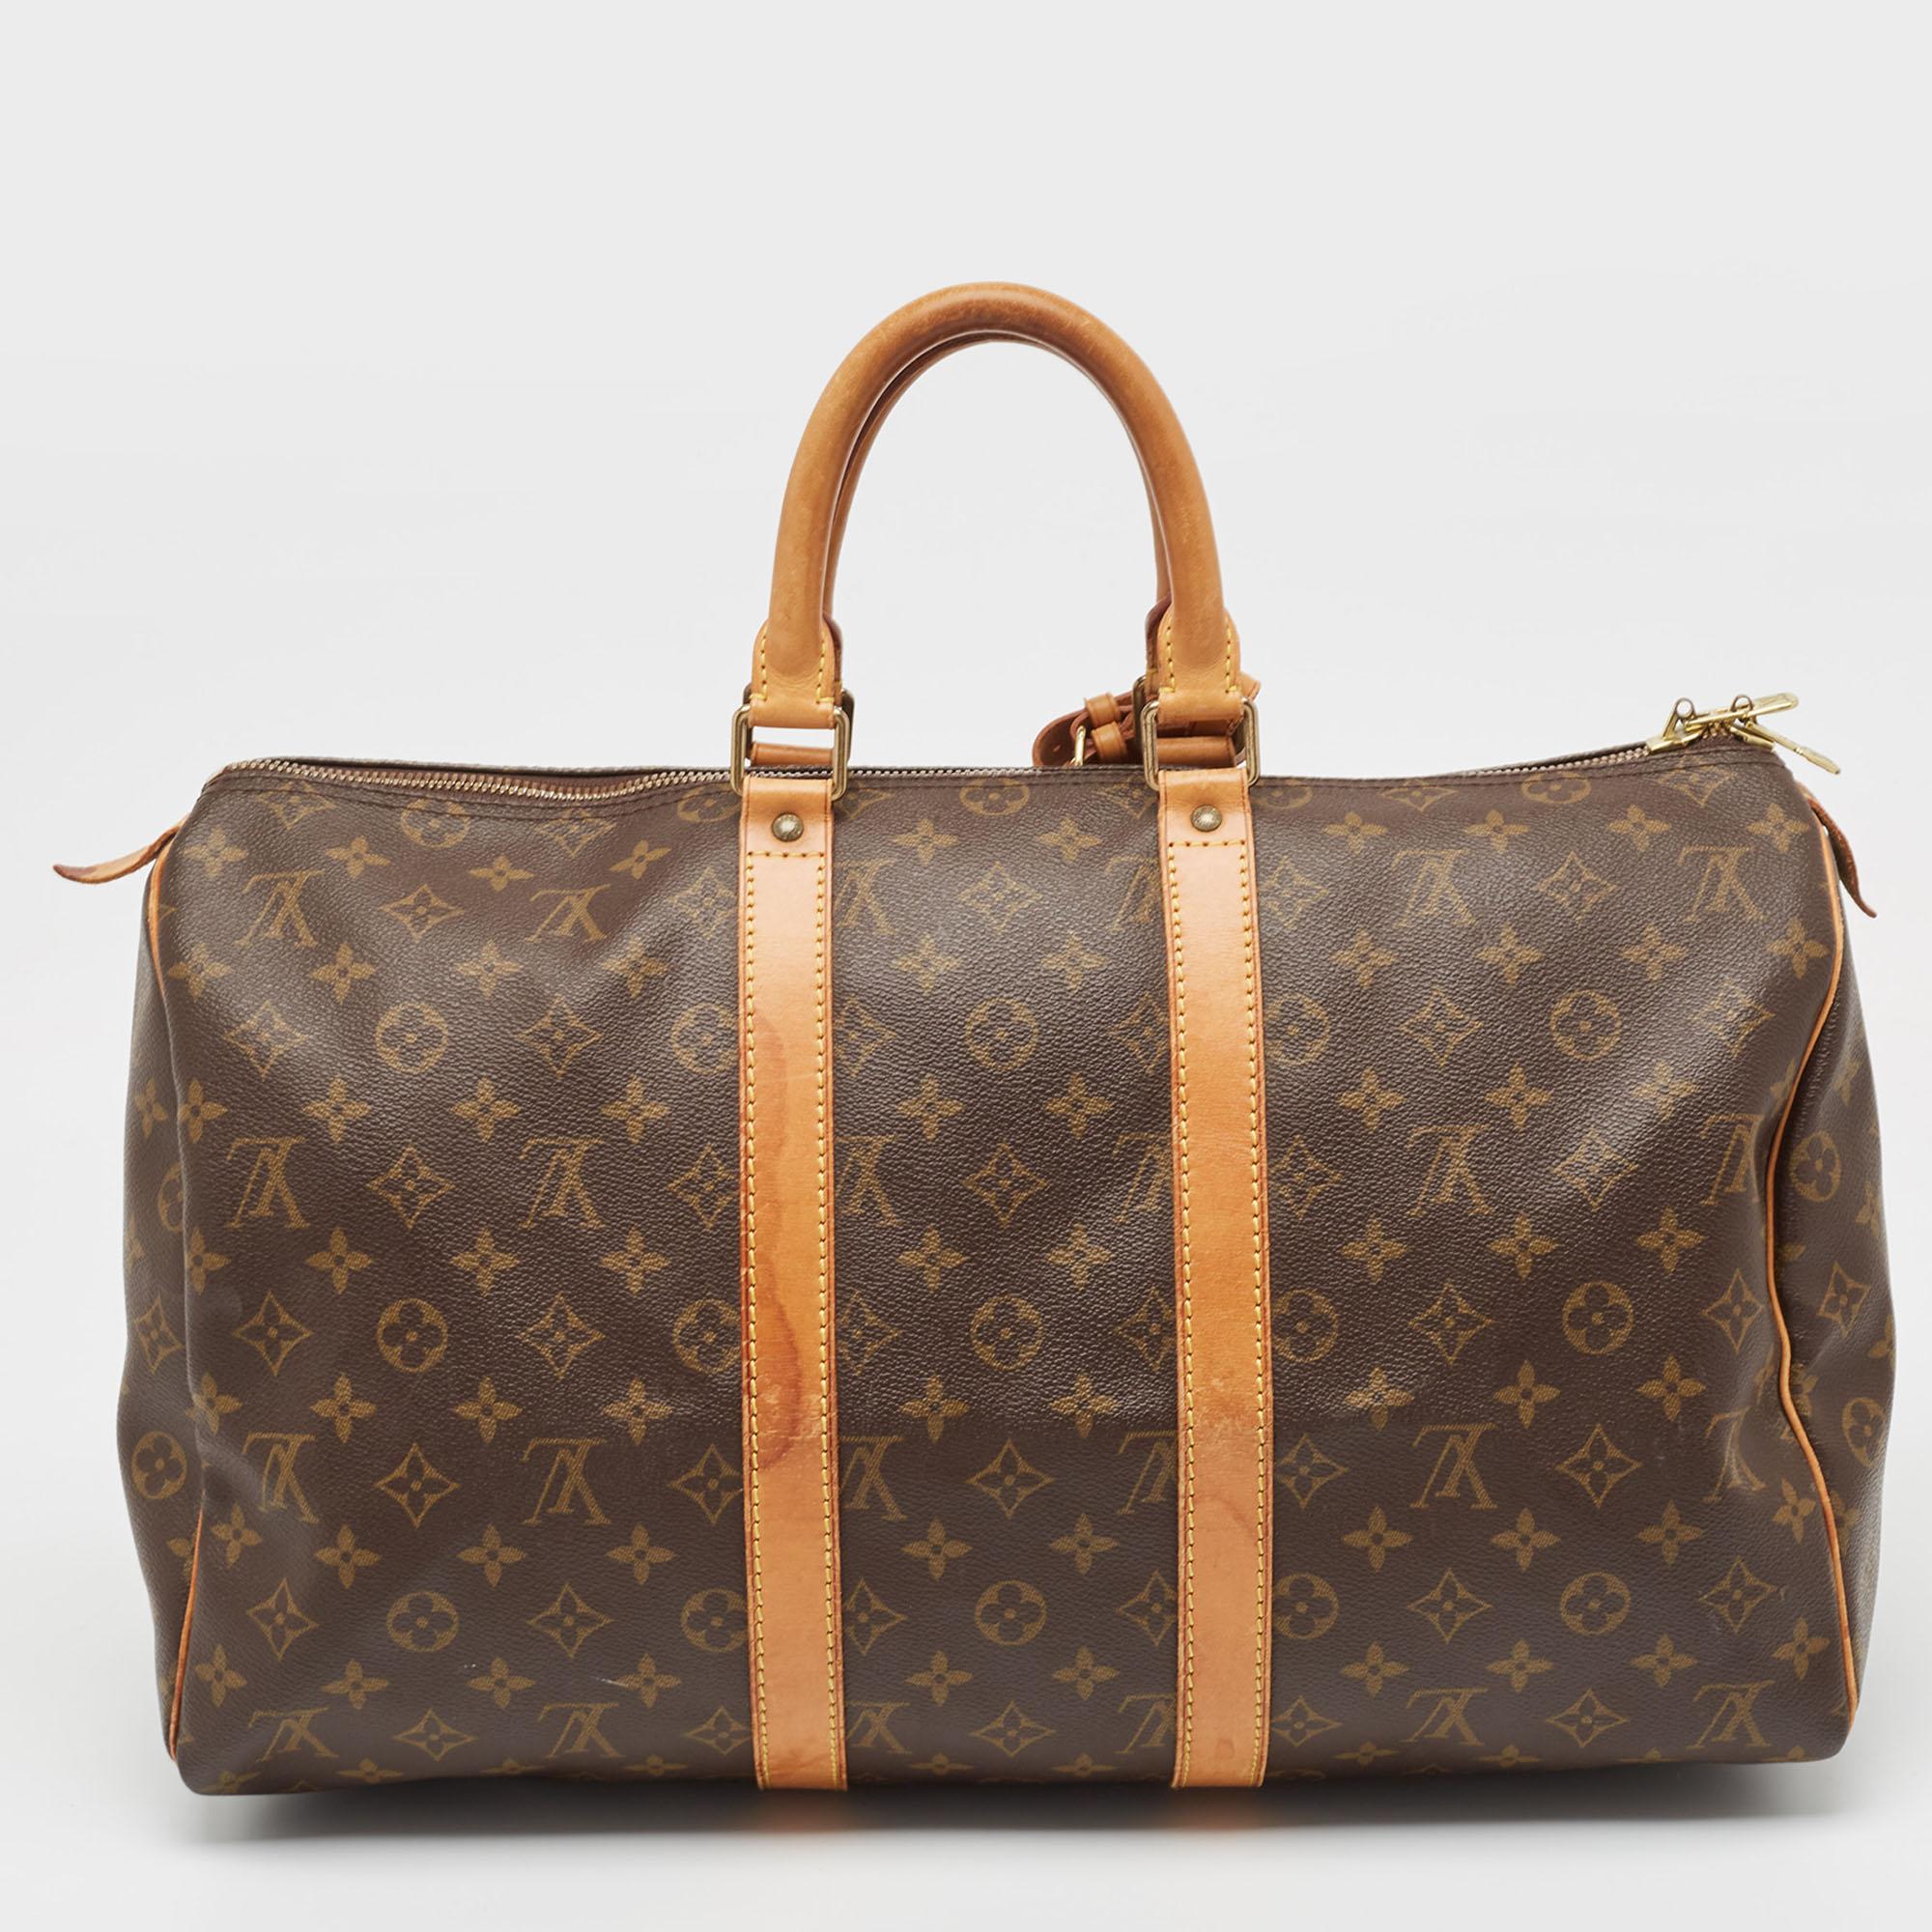 Fashionable people naturally like to travel in style and at such times only the best travel handbag will do. That's why it is wise to opt for this Keepall 45 as it is well-crafted from monogram canvas to endure and well-designed to grace you with